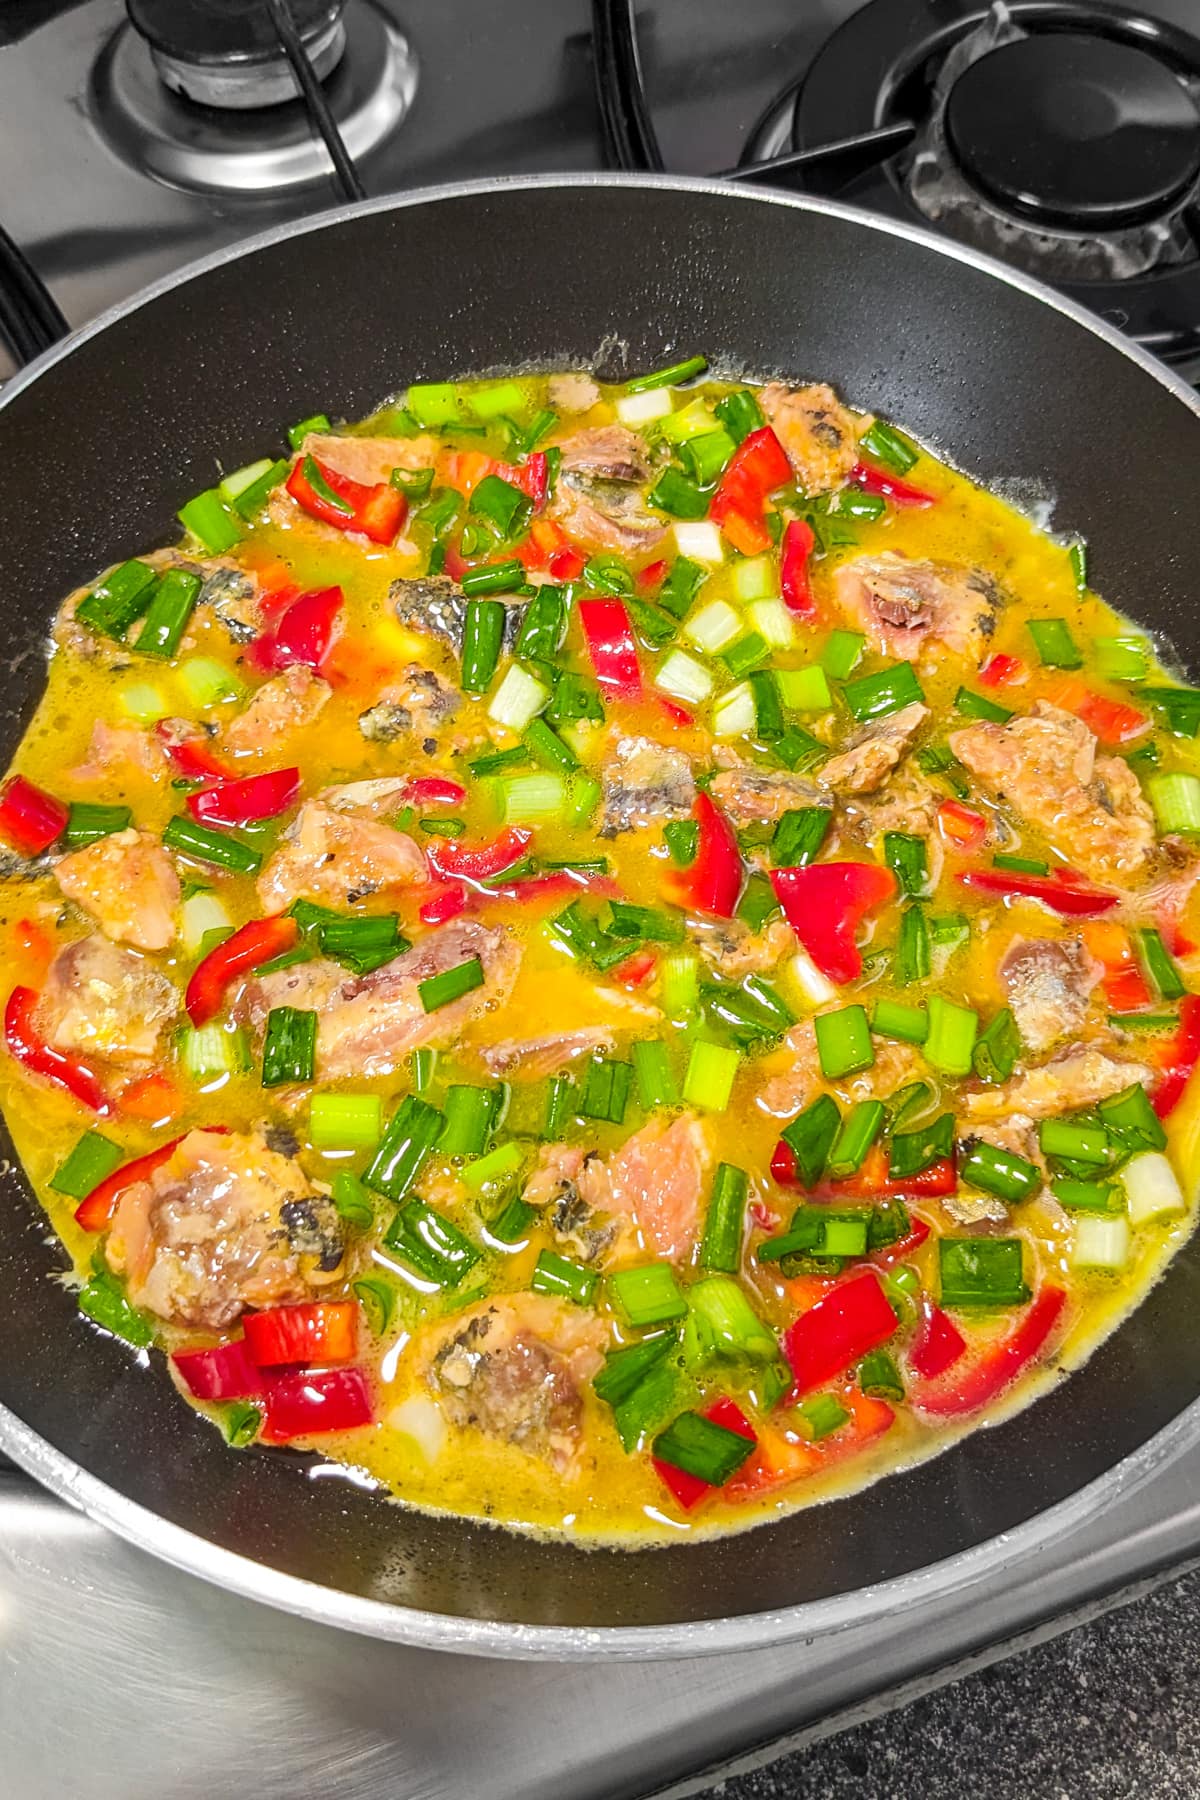 Sardine omelette with different veggies in a frying pan.